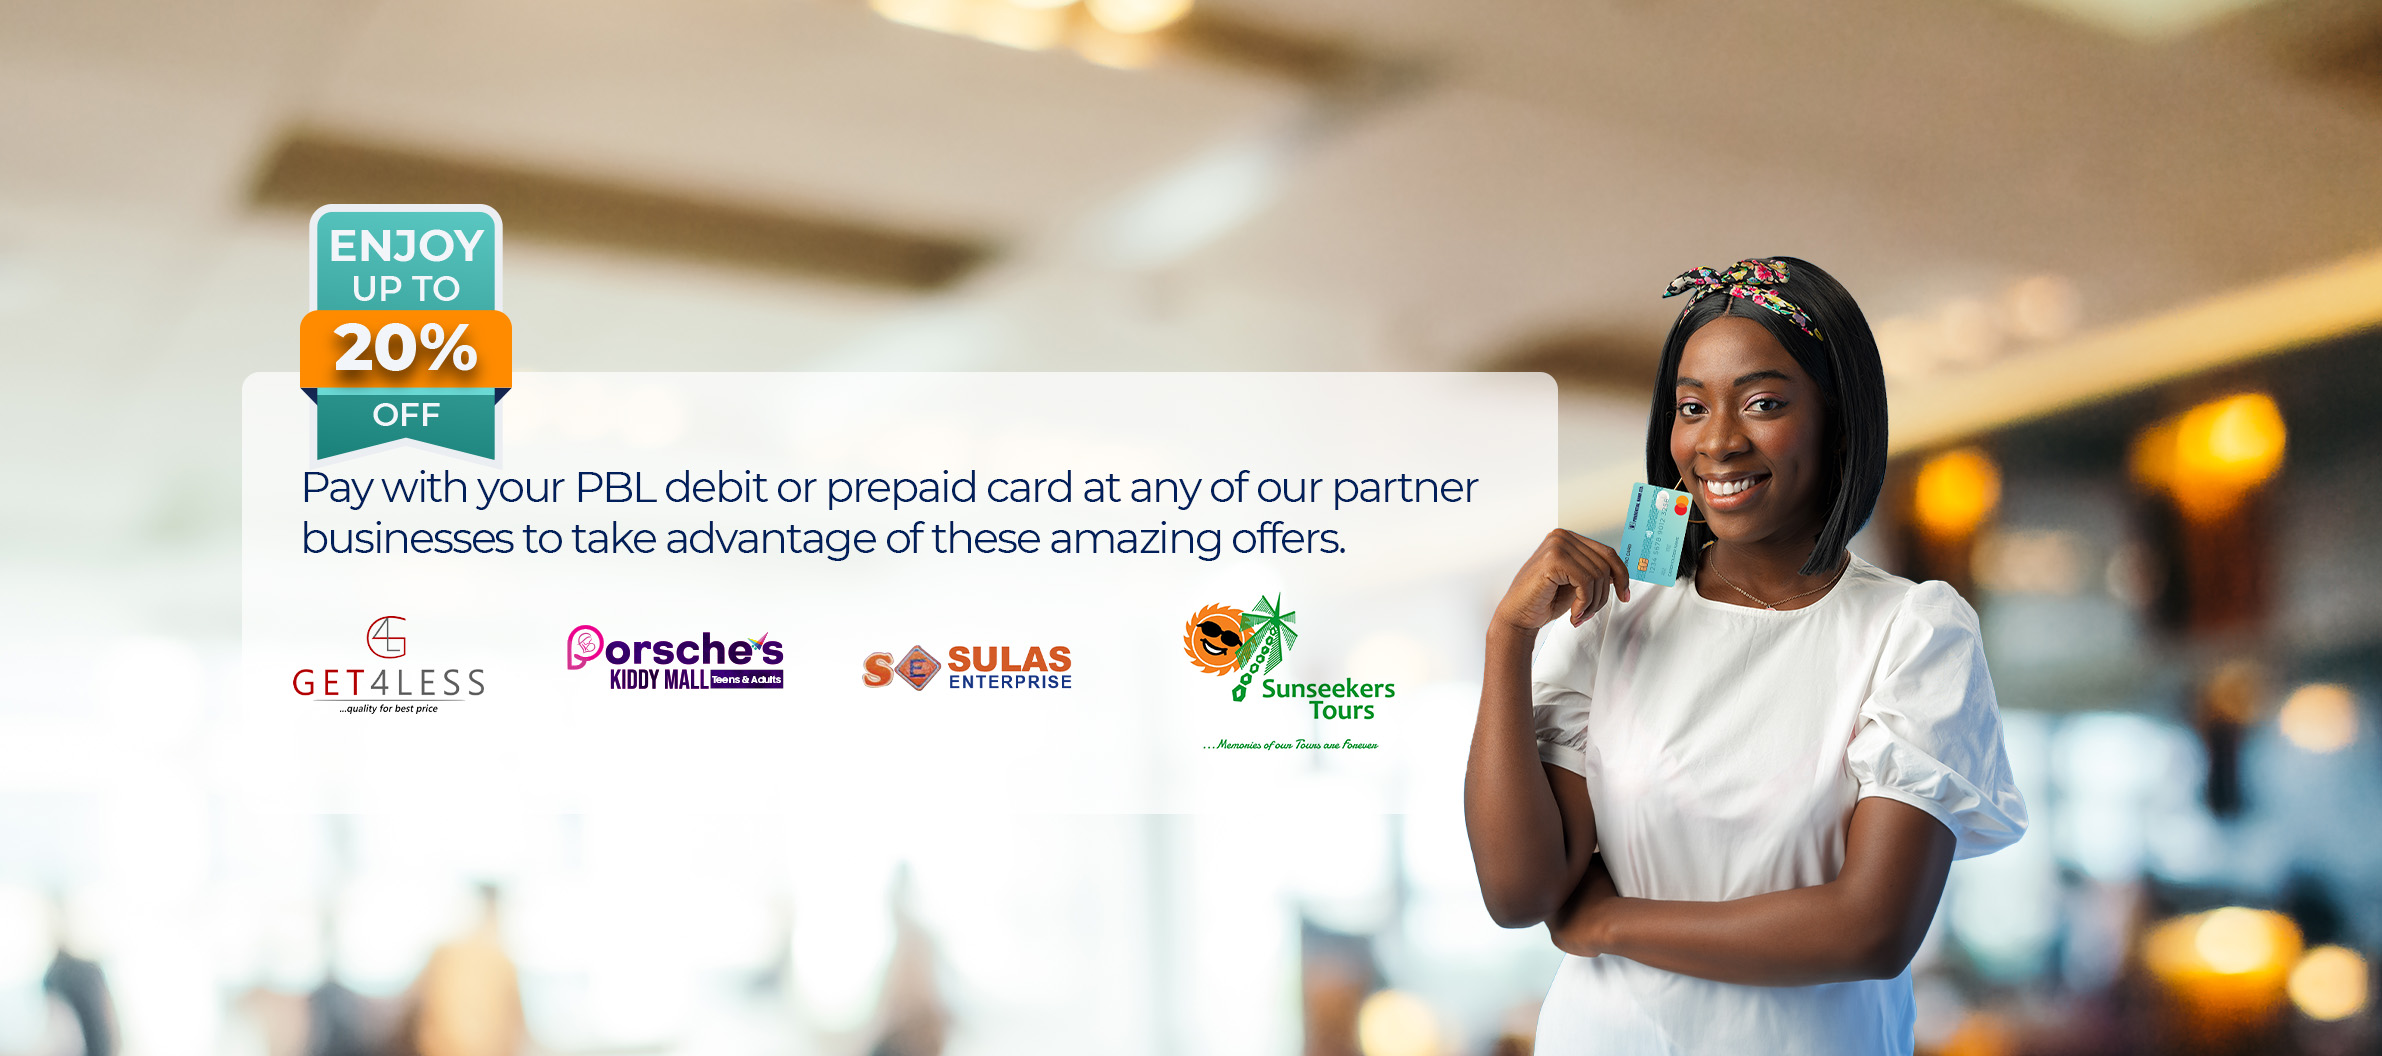 Image: Prudential Bank Discount Campaign Banner showing an excited lady holding shopping bags